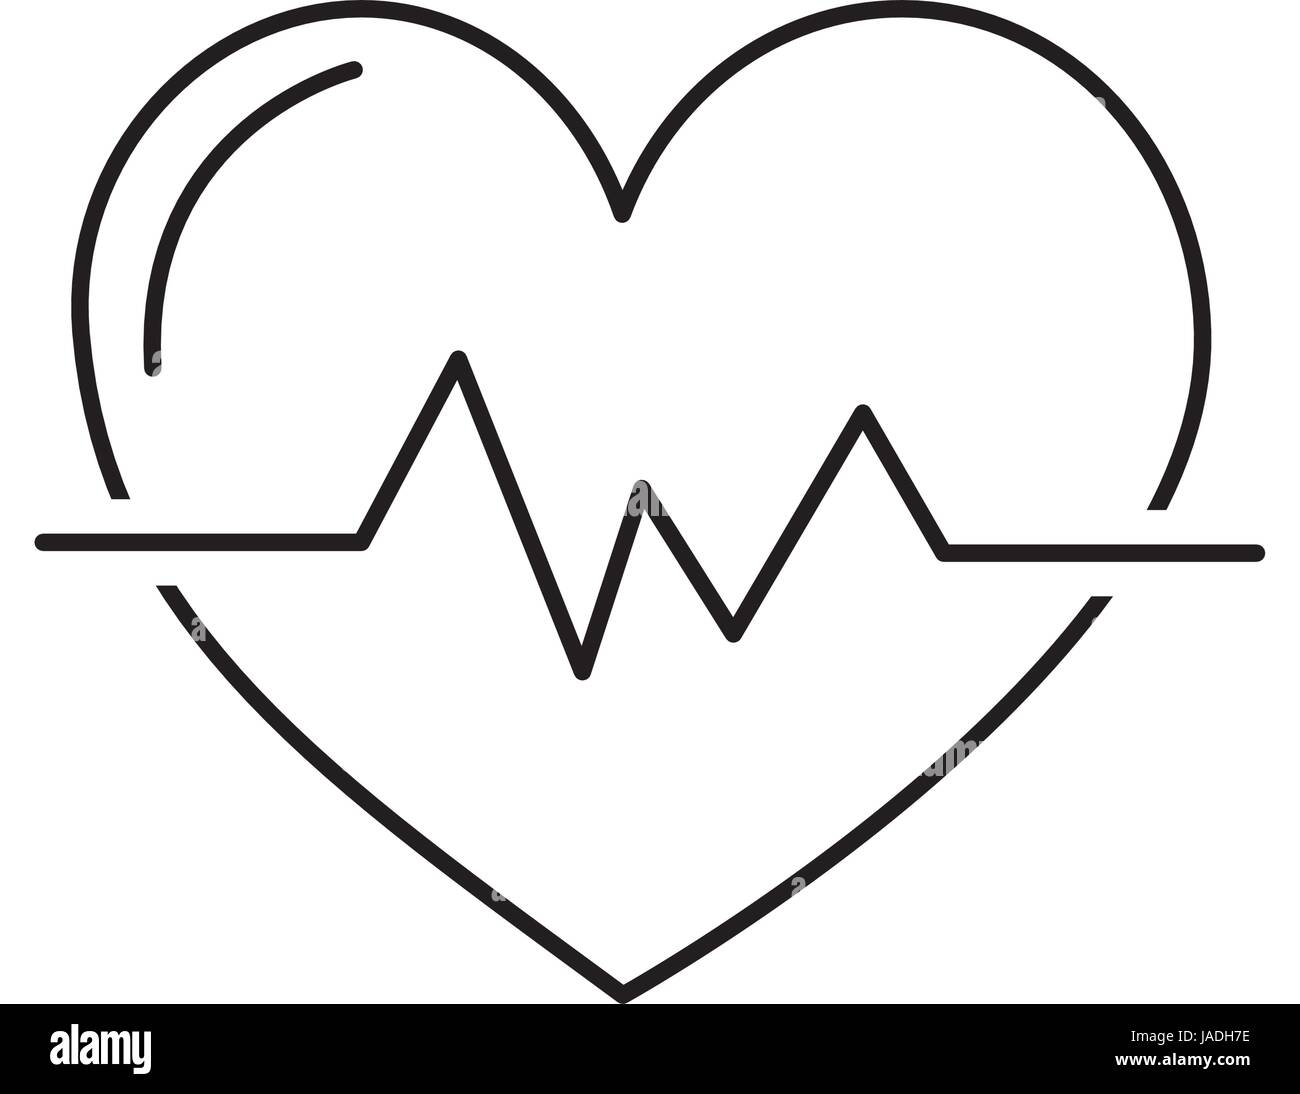 Cardiac cycle Black and White Stock Photos & Images - Alamy